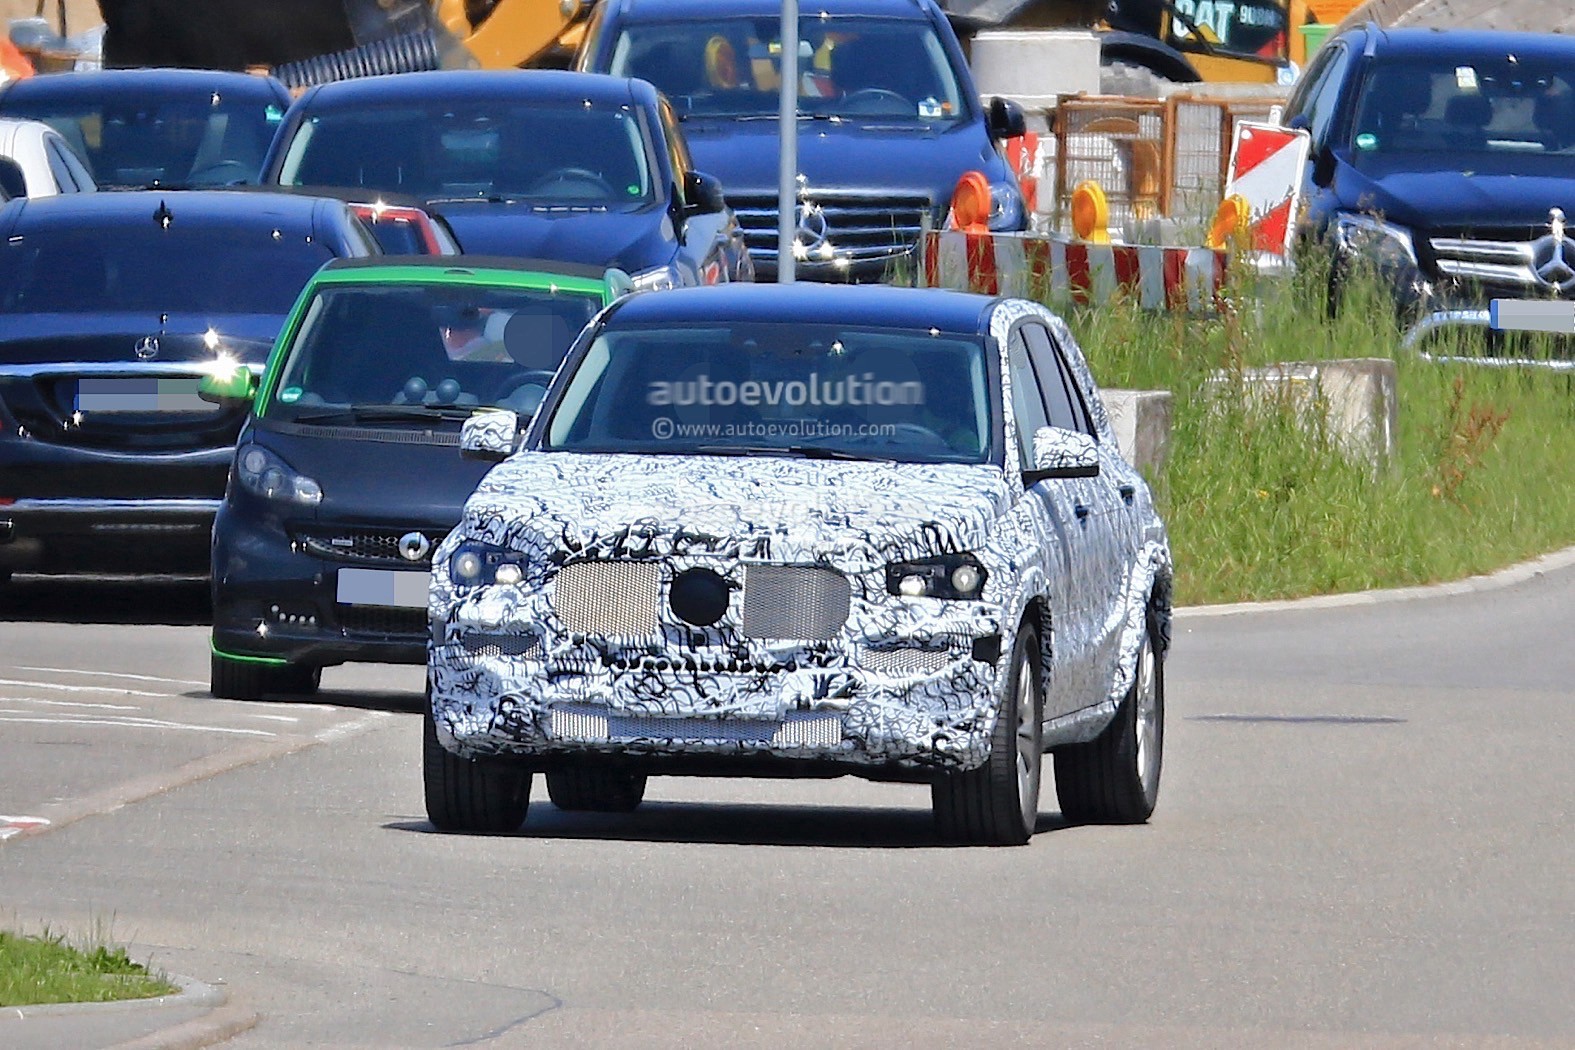 2018 Mercedes-Benz GLB Starts Testing With Production Body - autoevolution1575 x 1050